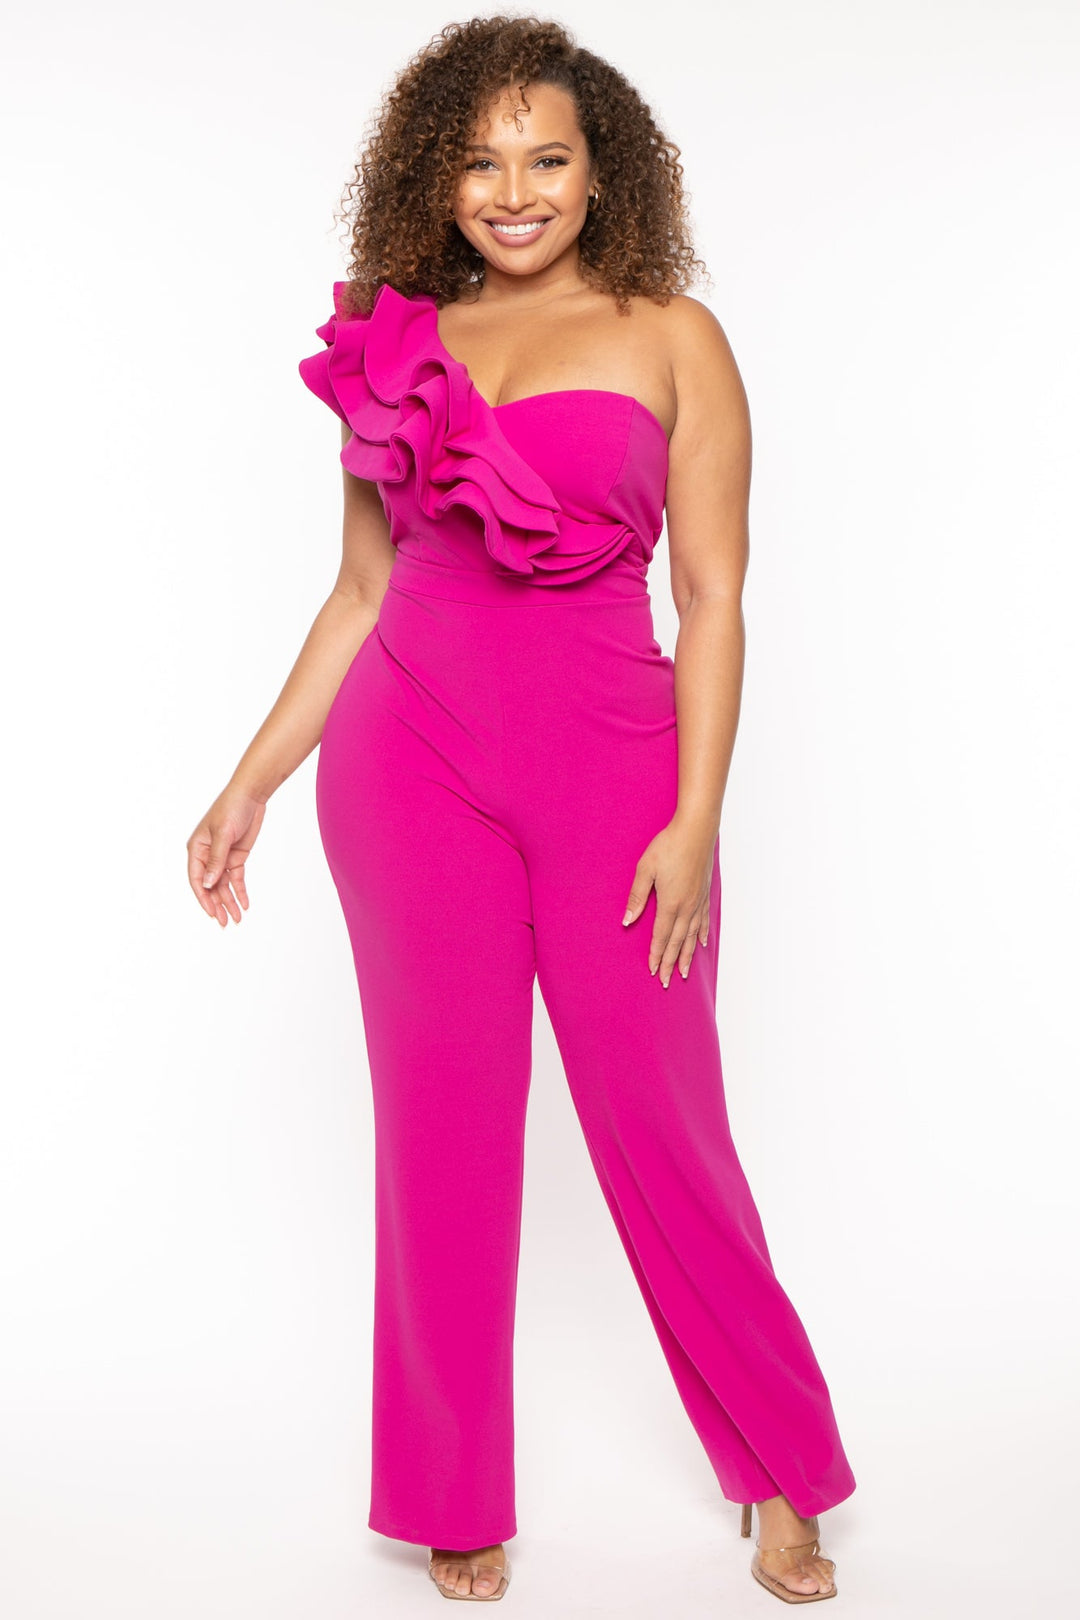  Rompers and Jumpsuits for Women Plus Size Plus Size Jumpsuits  for Women Dressy Wide Leg Jumpsuits Sexy (Hot Pink, XXL) : Clothing, Shoes  & Jewelry